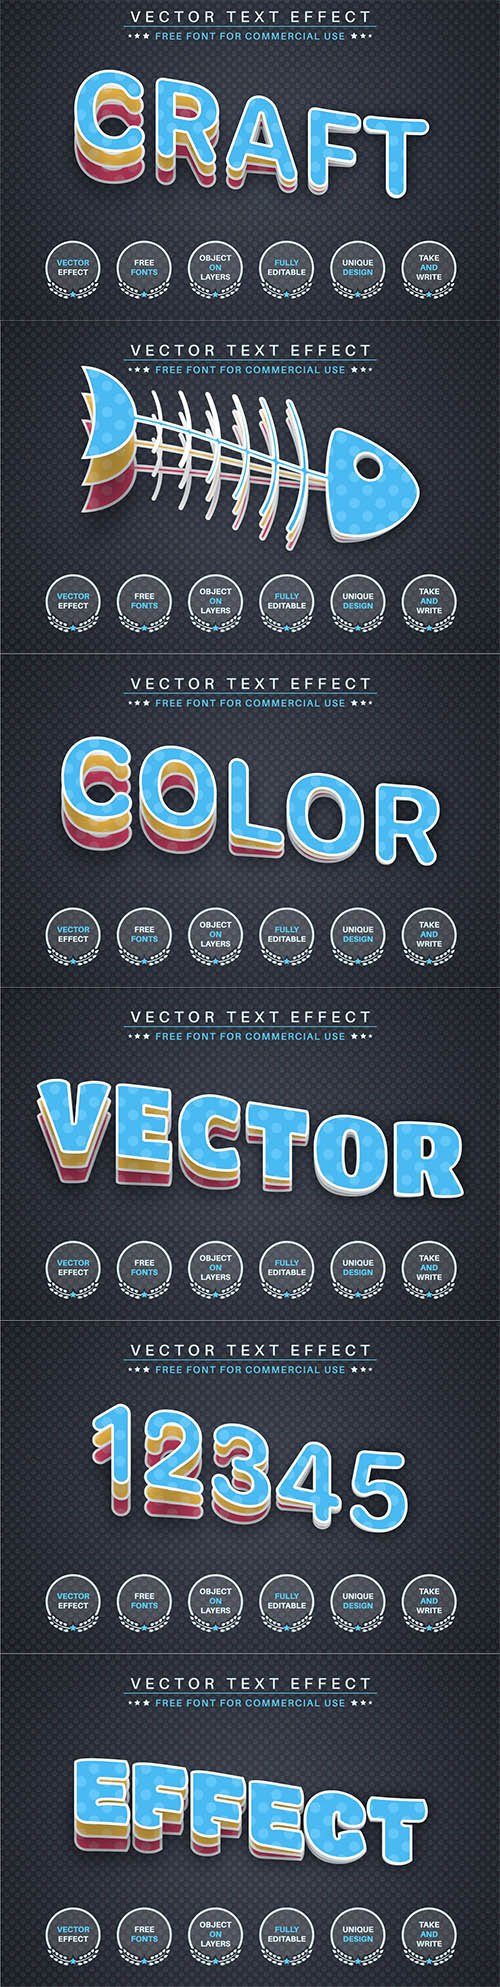 Slice paper - editable text effect, font style